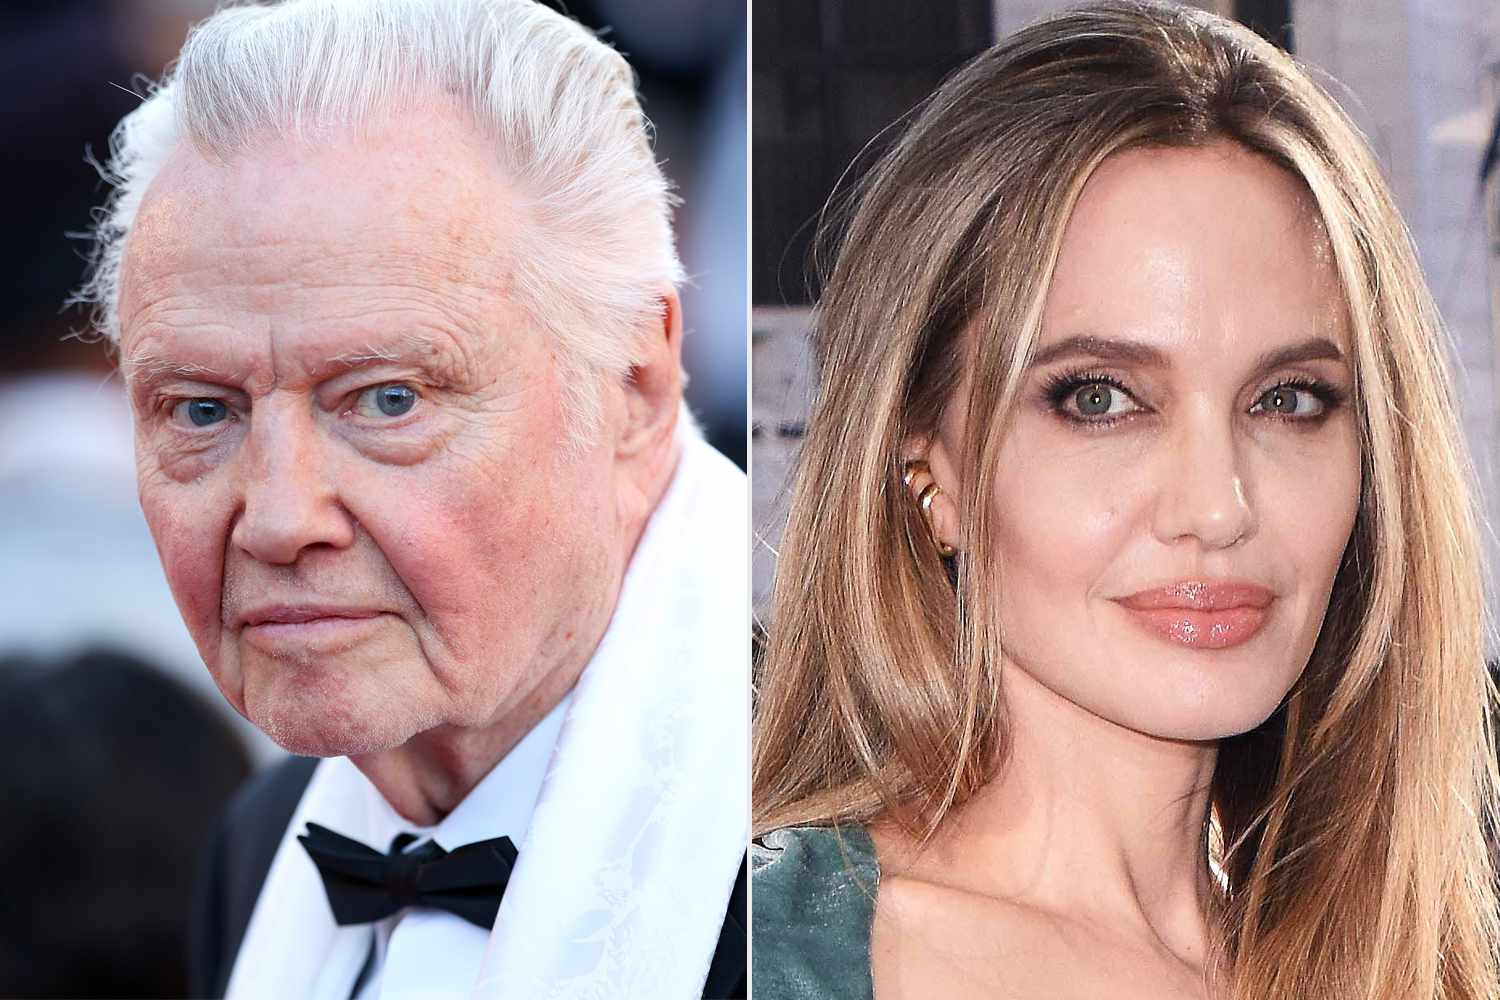 Jon Voight claims daughter Angelina Jolie has been 'influenced by antisemitic people' over Israel-Hamas stance